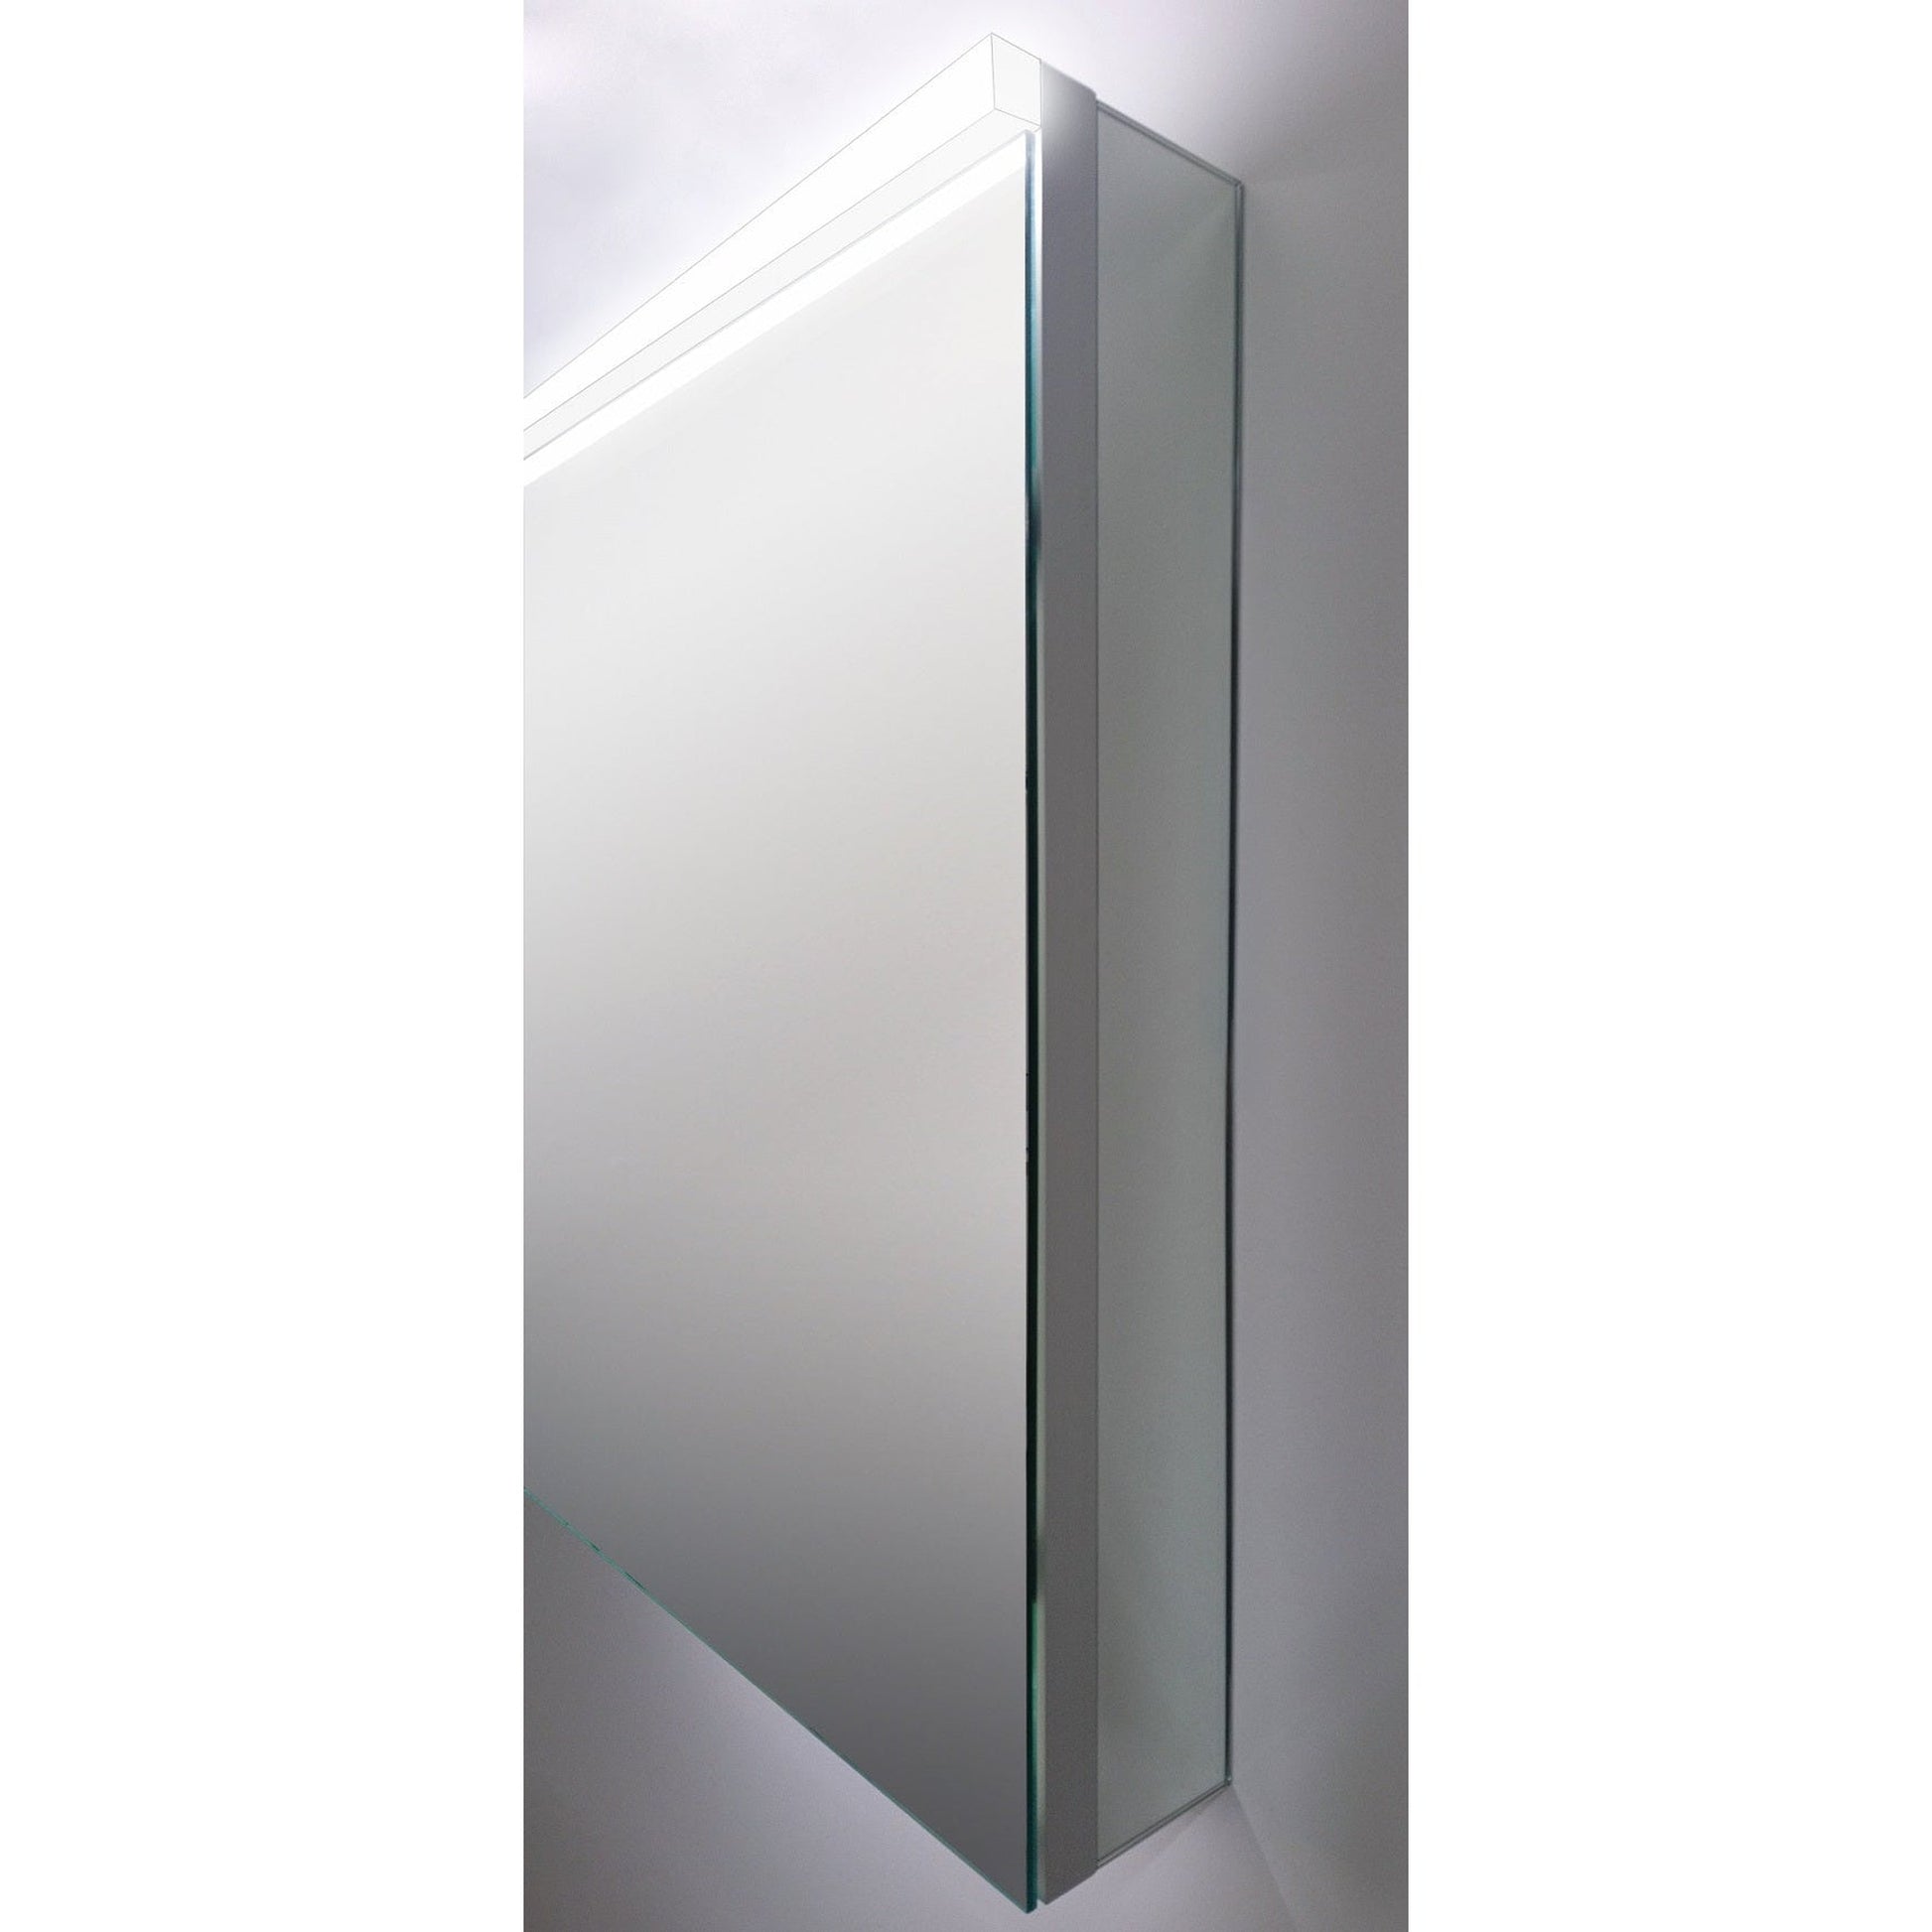 Sidler Xamo 20" x 30" 3000K Single Mirror Left Hinged Door Medicine Cabinet With Built-in GFCI outlet and Night Light Function